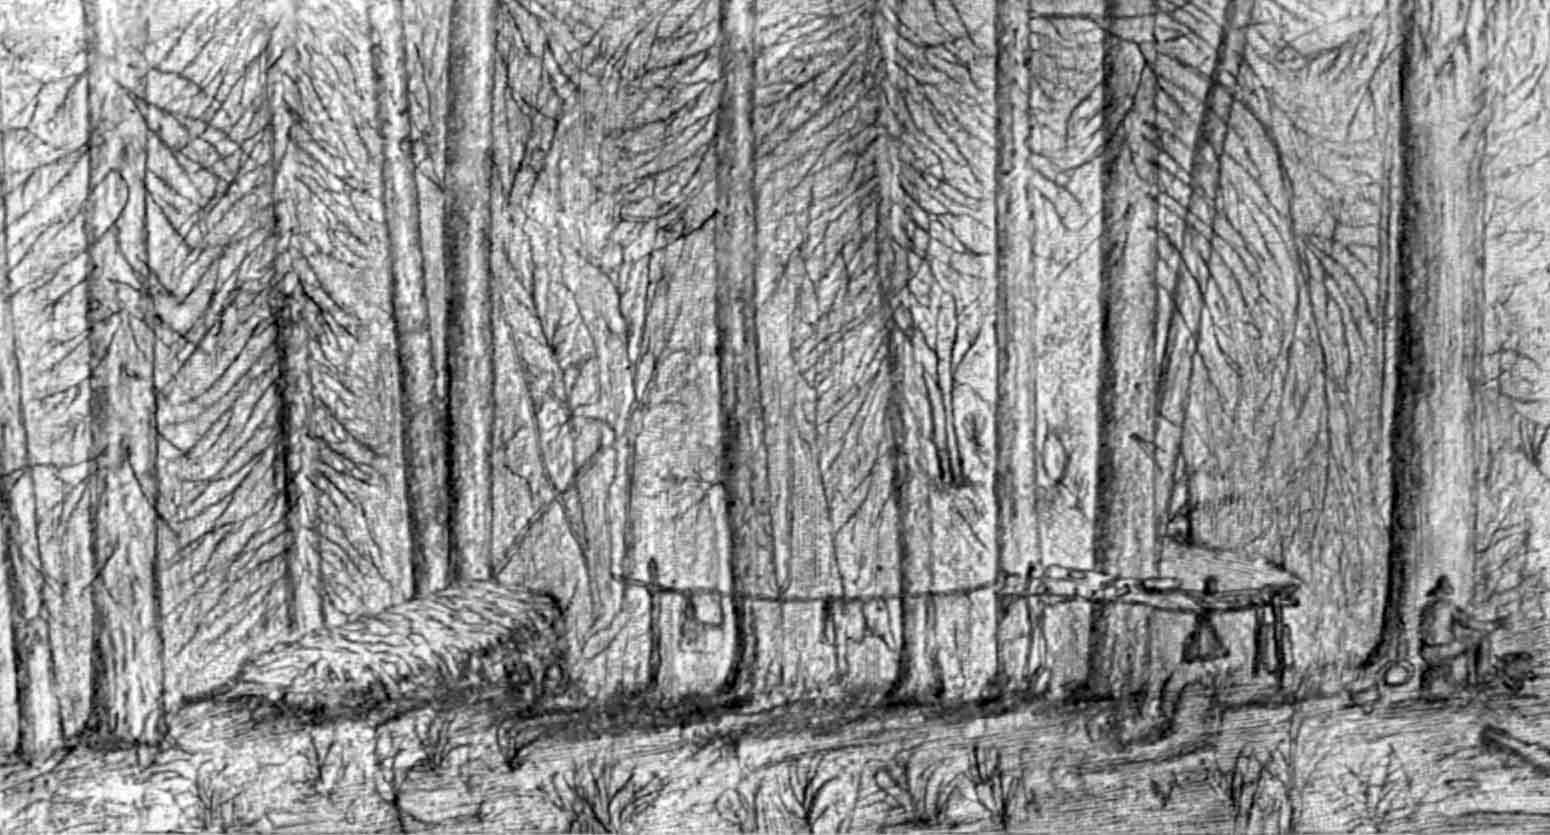 A sketch of a campsite in a forest clearing. At the left side of the campsite sits a bed of pine needles which form a sleeping platform. The middle of the campsite shows numerous camp tools and supplies, beyond which sits a man at the base of a tree.